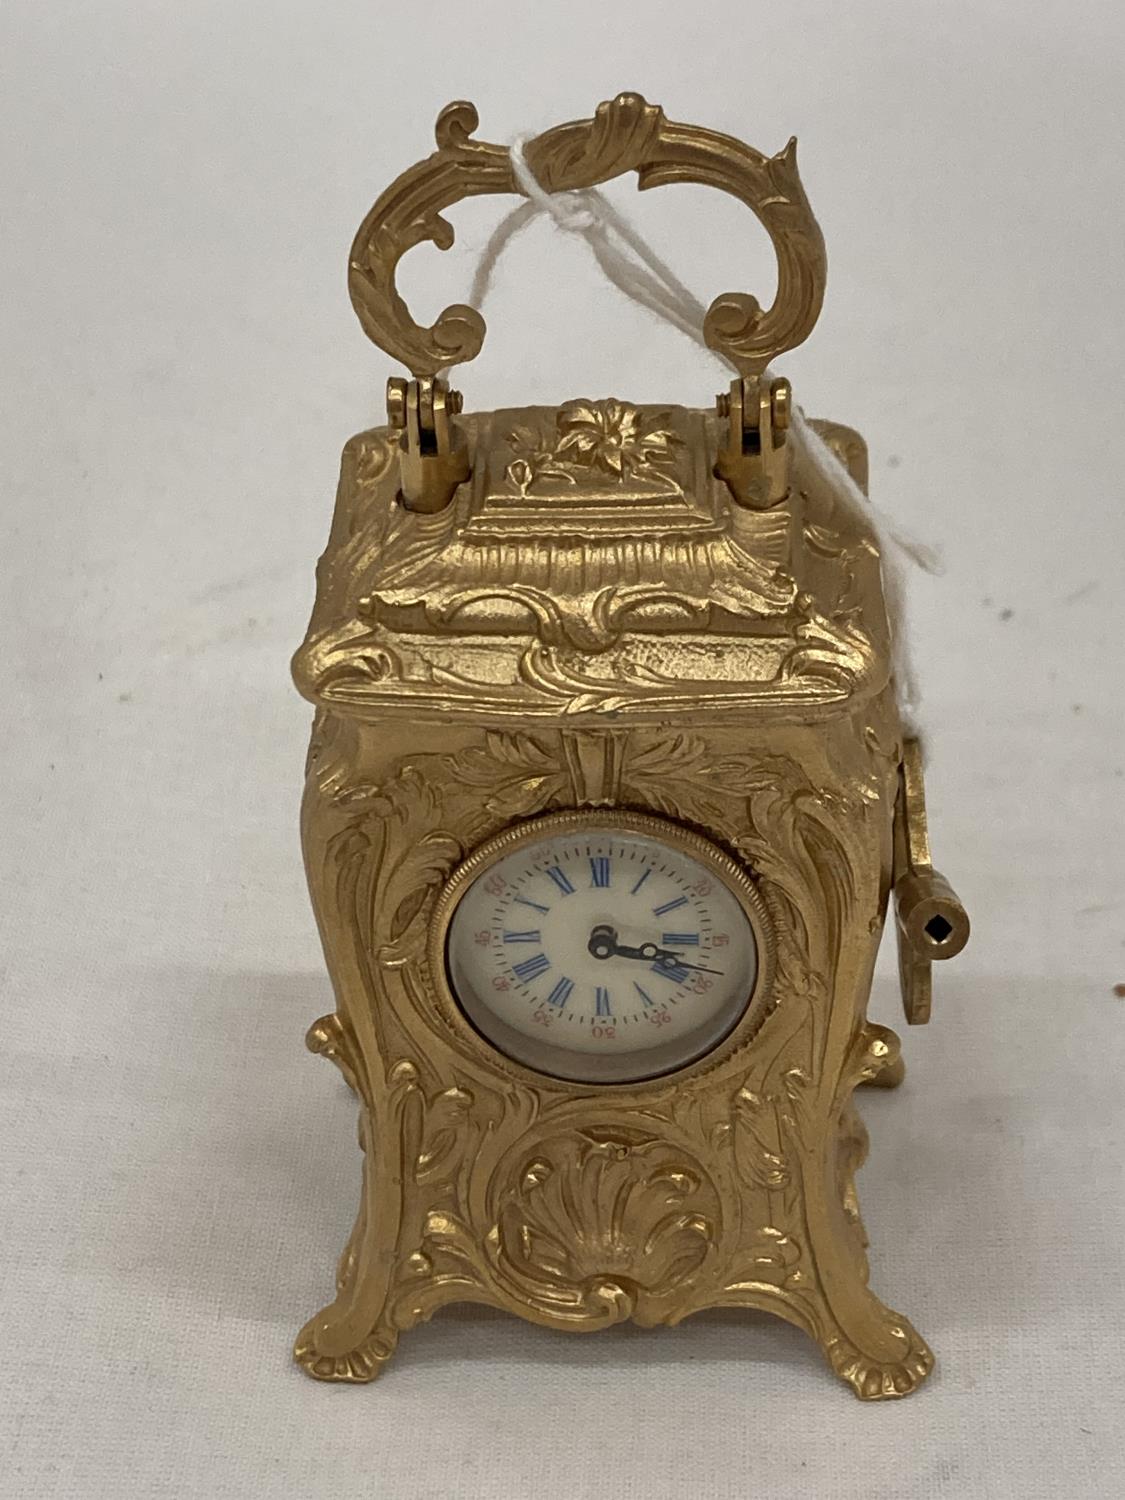 A MINIATURE GILDED FRENCH CLOCK WITH KEY HEIGHT 3.5" SEEN WORKING BUT NO WARRANTY